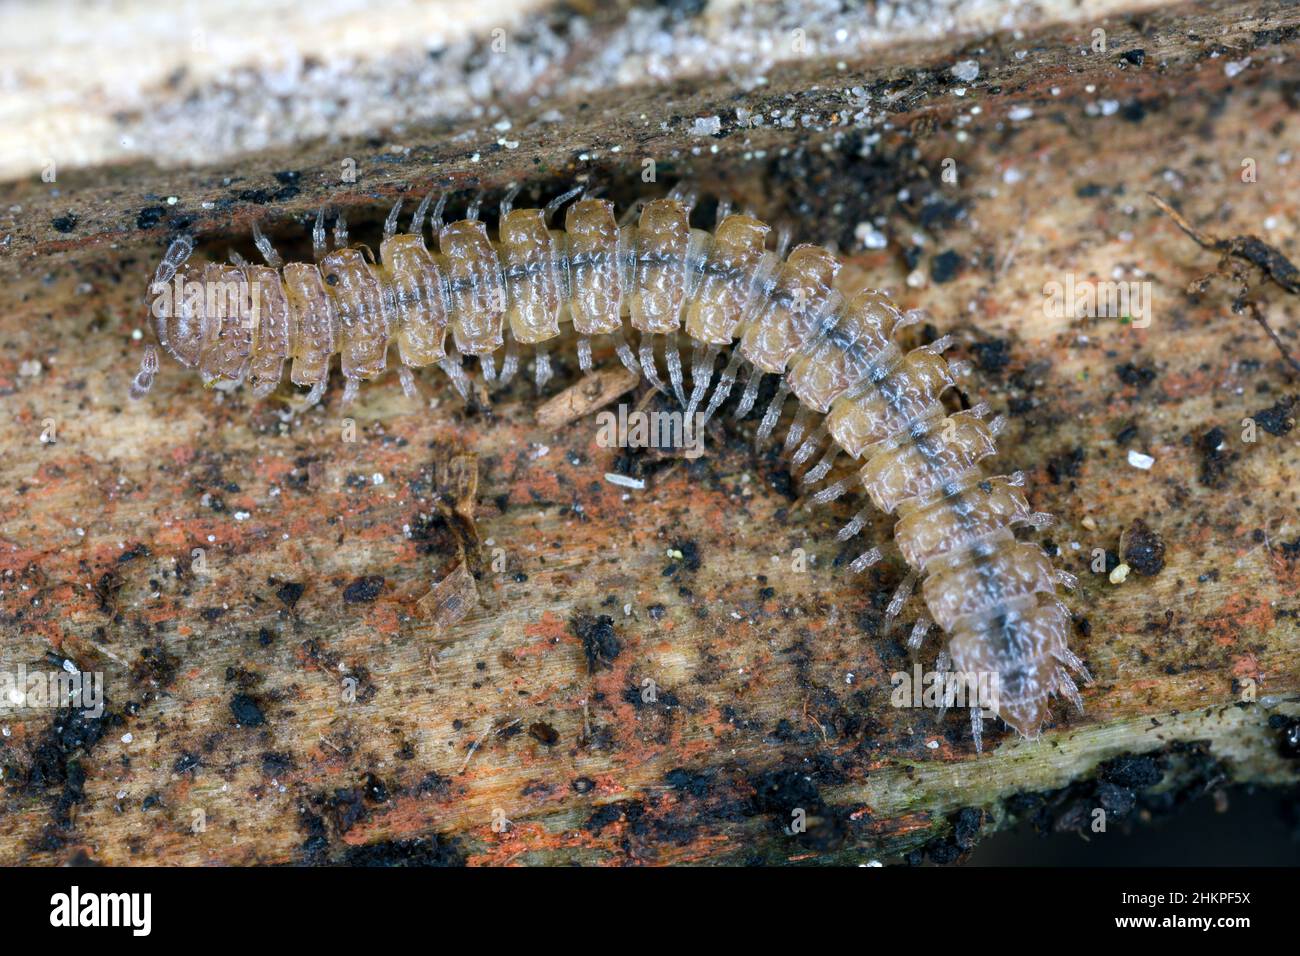 Flat-backed millipede (Polydesmus angustus) on wood of a dead tree Stock Photo